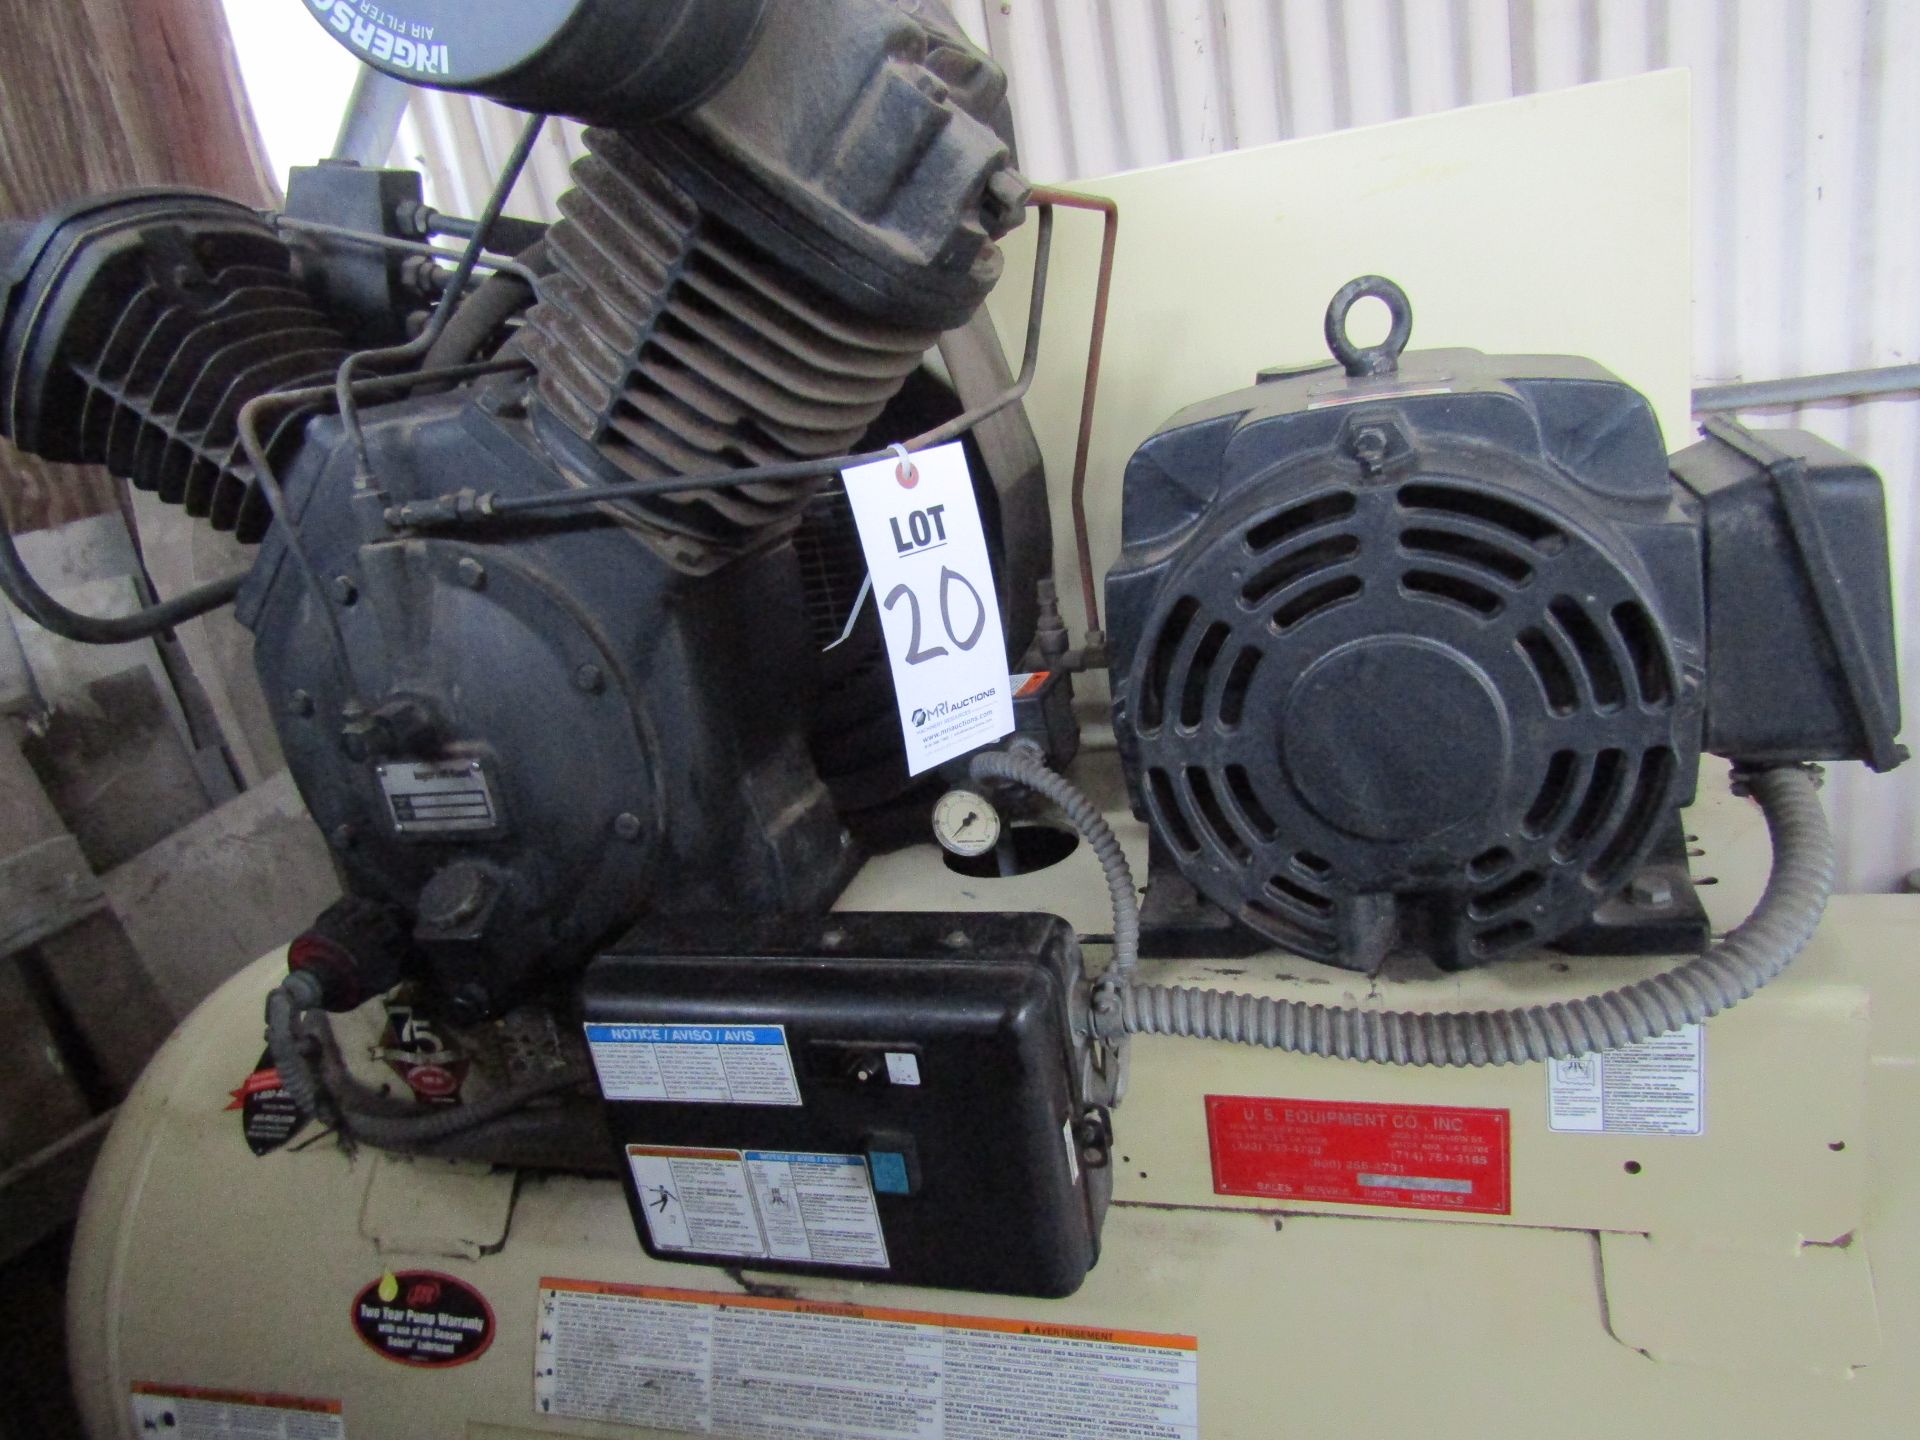 INGERSOLL-RAND 7100E15 AIR COMPRESSOR, 120 GALLONS, 15 HP, 3 PHASE, SERIAL 0512290096, PUMP MODEL - Image 2 of 5